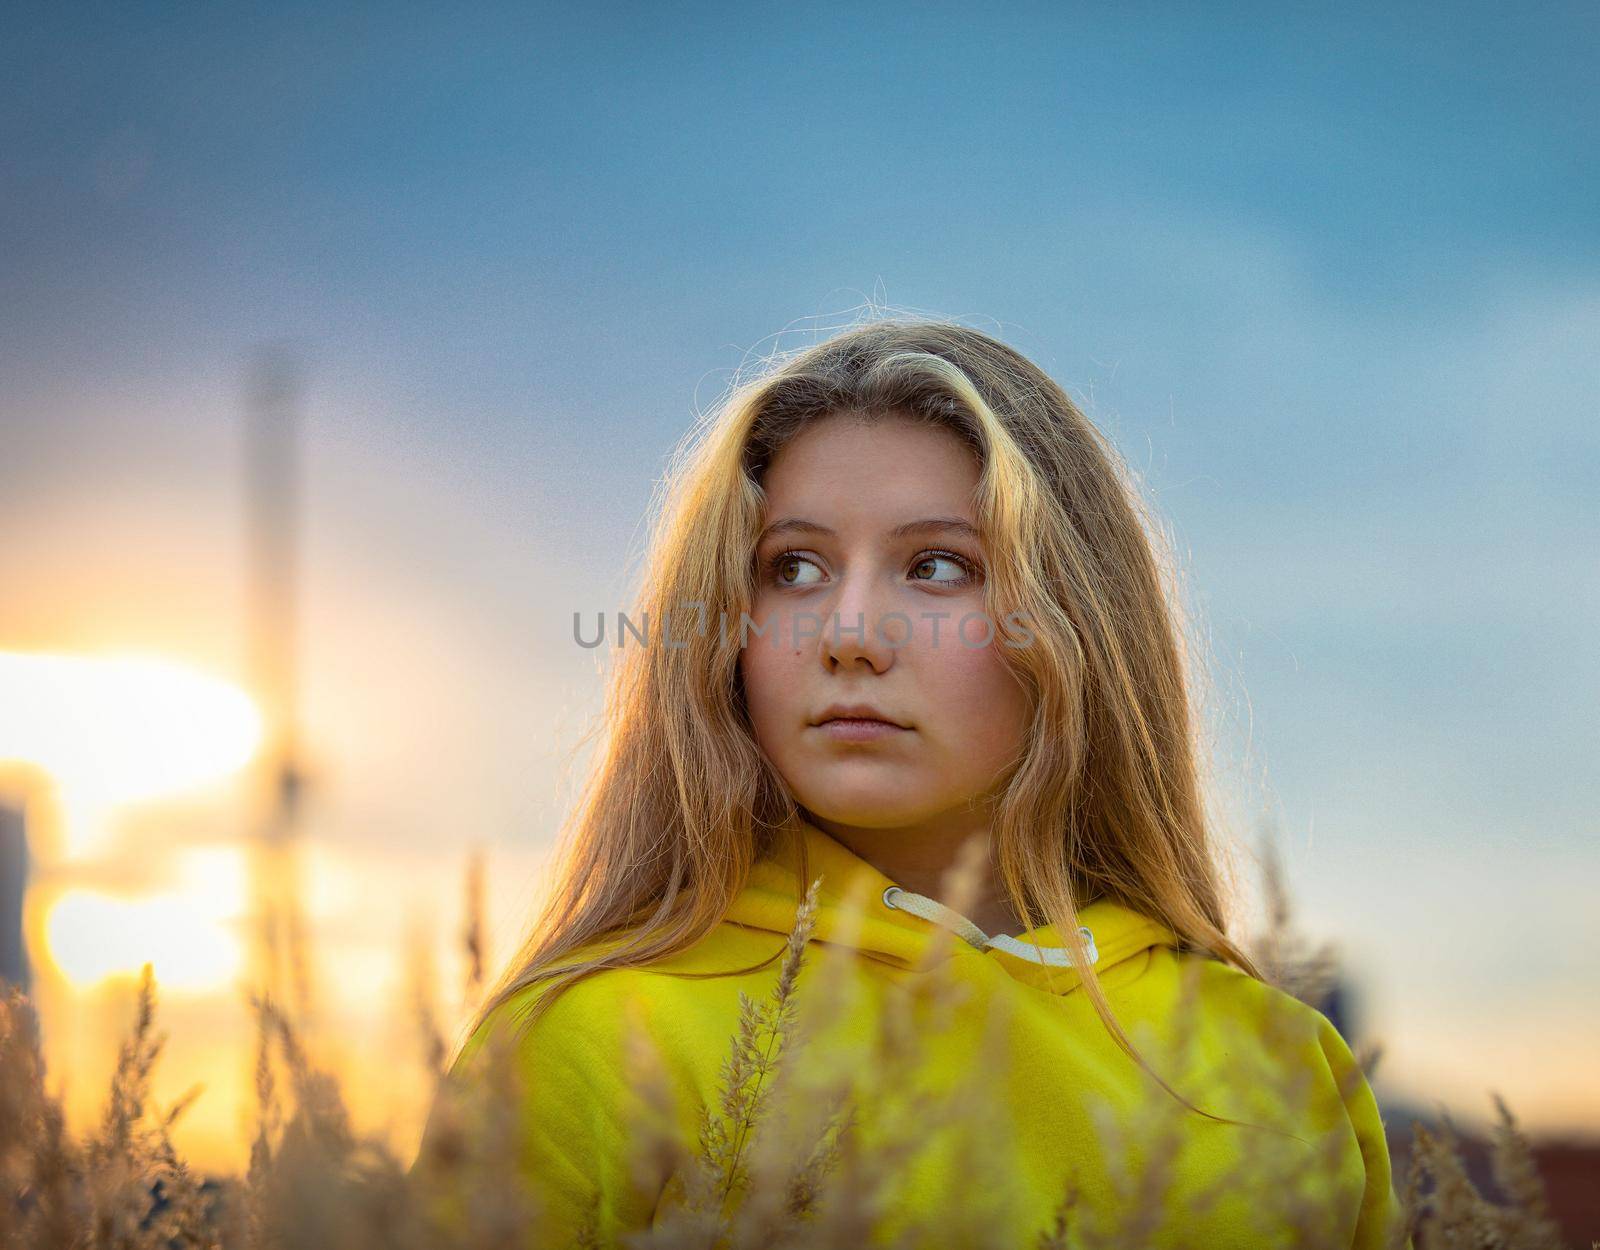 A young girl with long hair walks across a field with tall grass. Blonde hair. by Yurich32